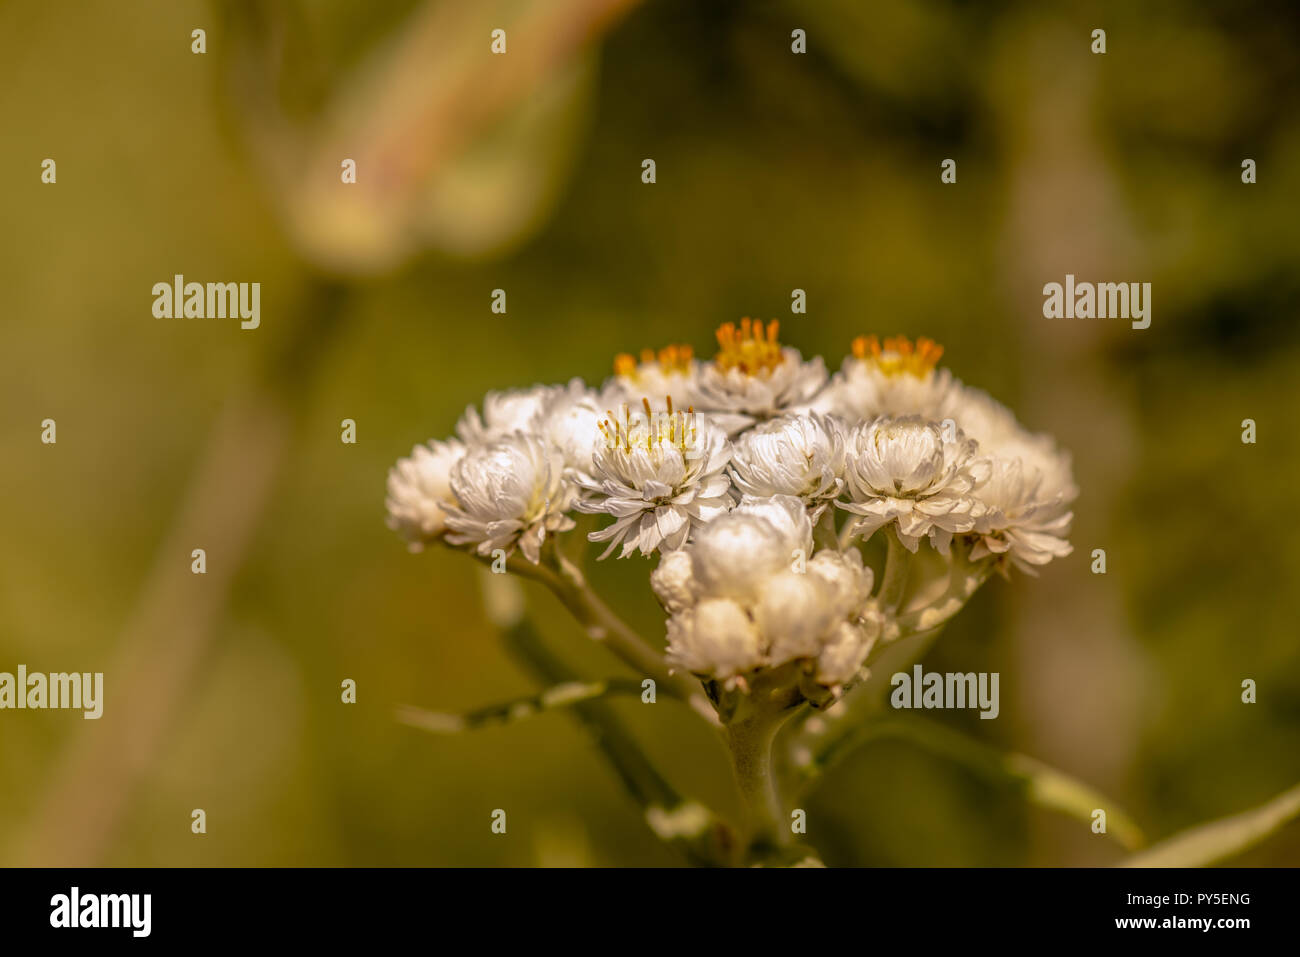 Color outdoor nature image of a white yarrow / daisy blossom with a shallow depth of field on a bright hot sunny summer day natural blurred background Stock Photo